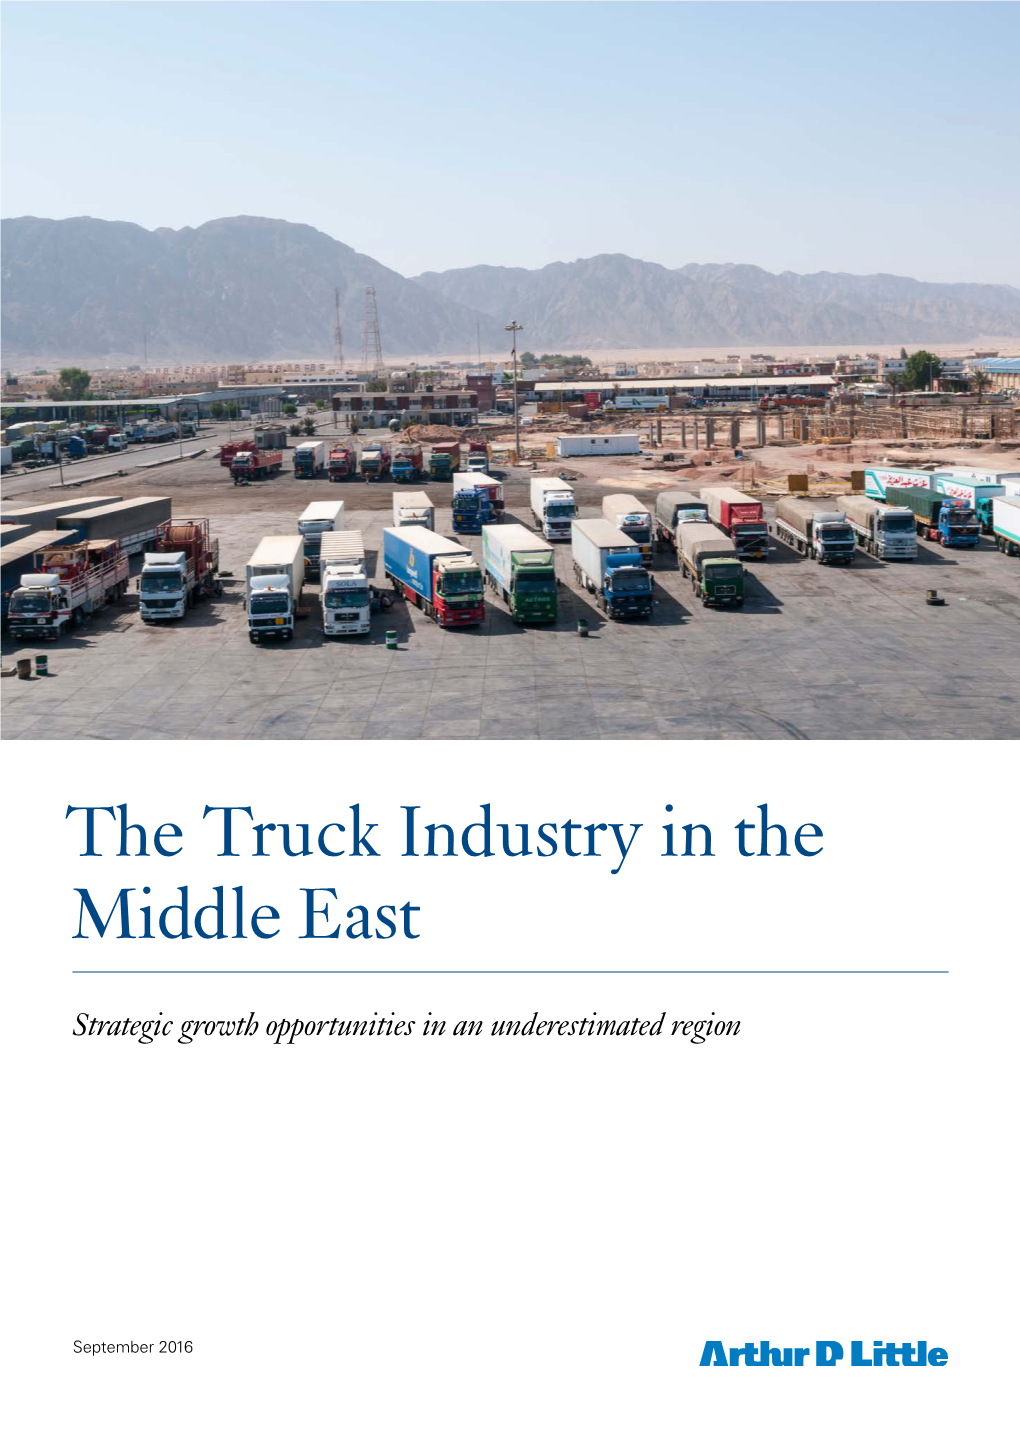 The Truck Industry in the Middle East